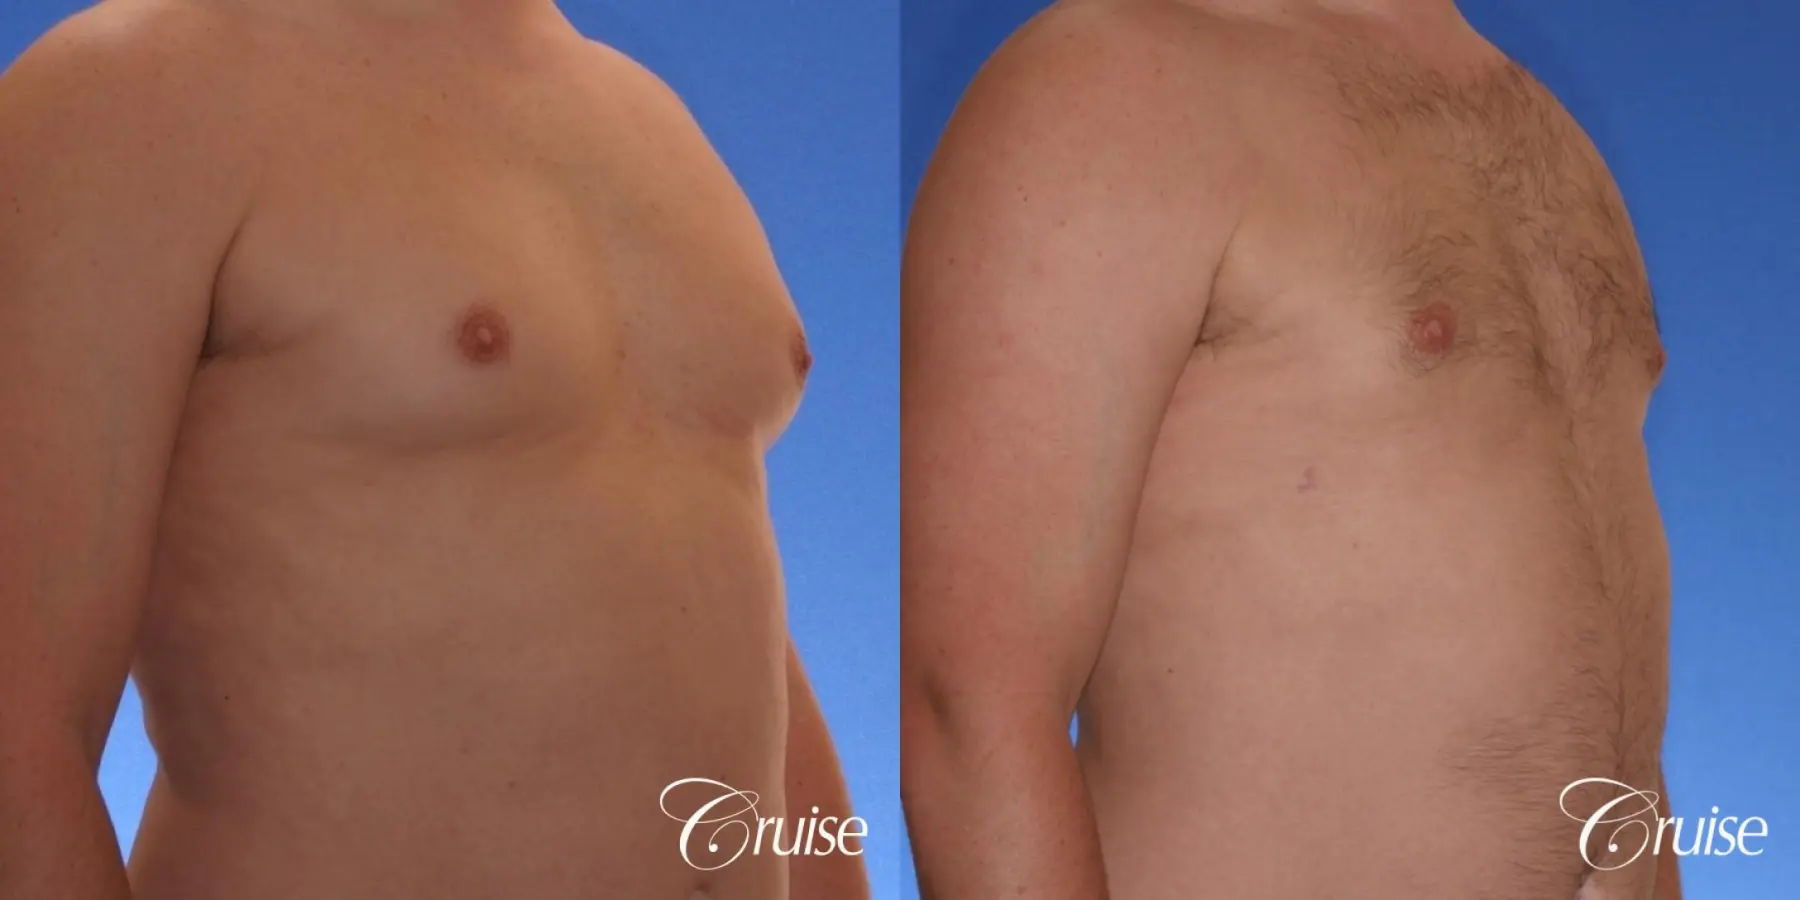 male adult with gynecomastia - Before and After 3